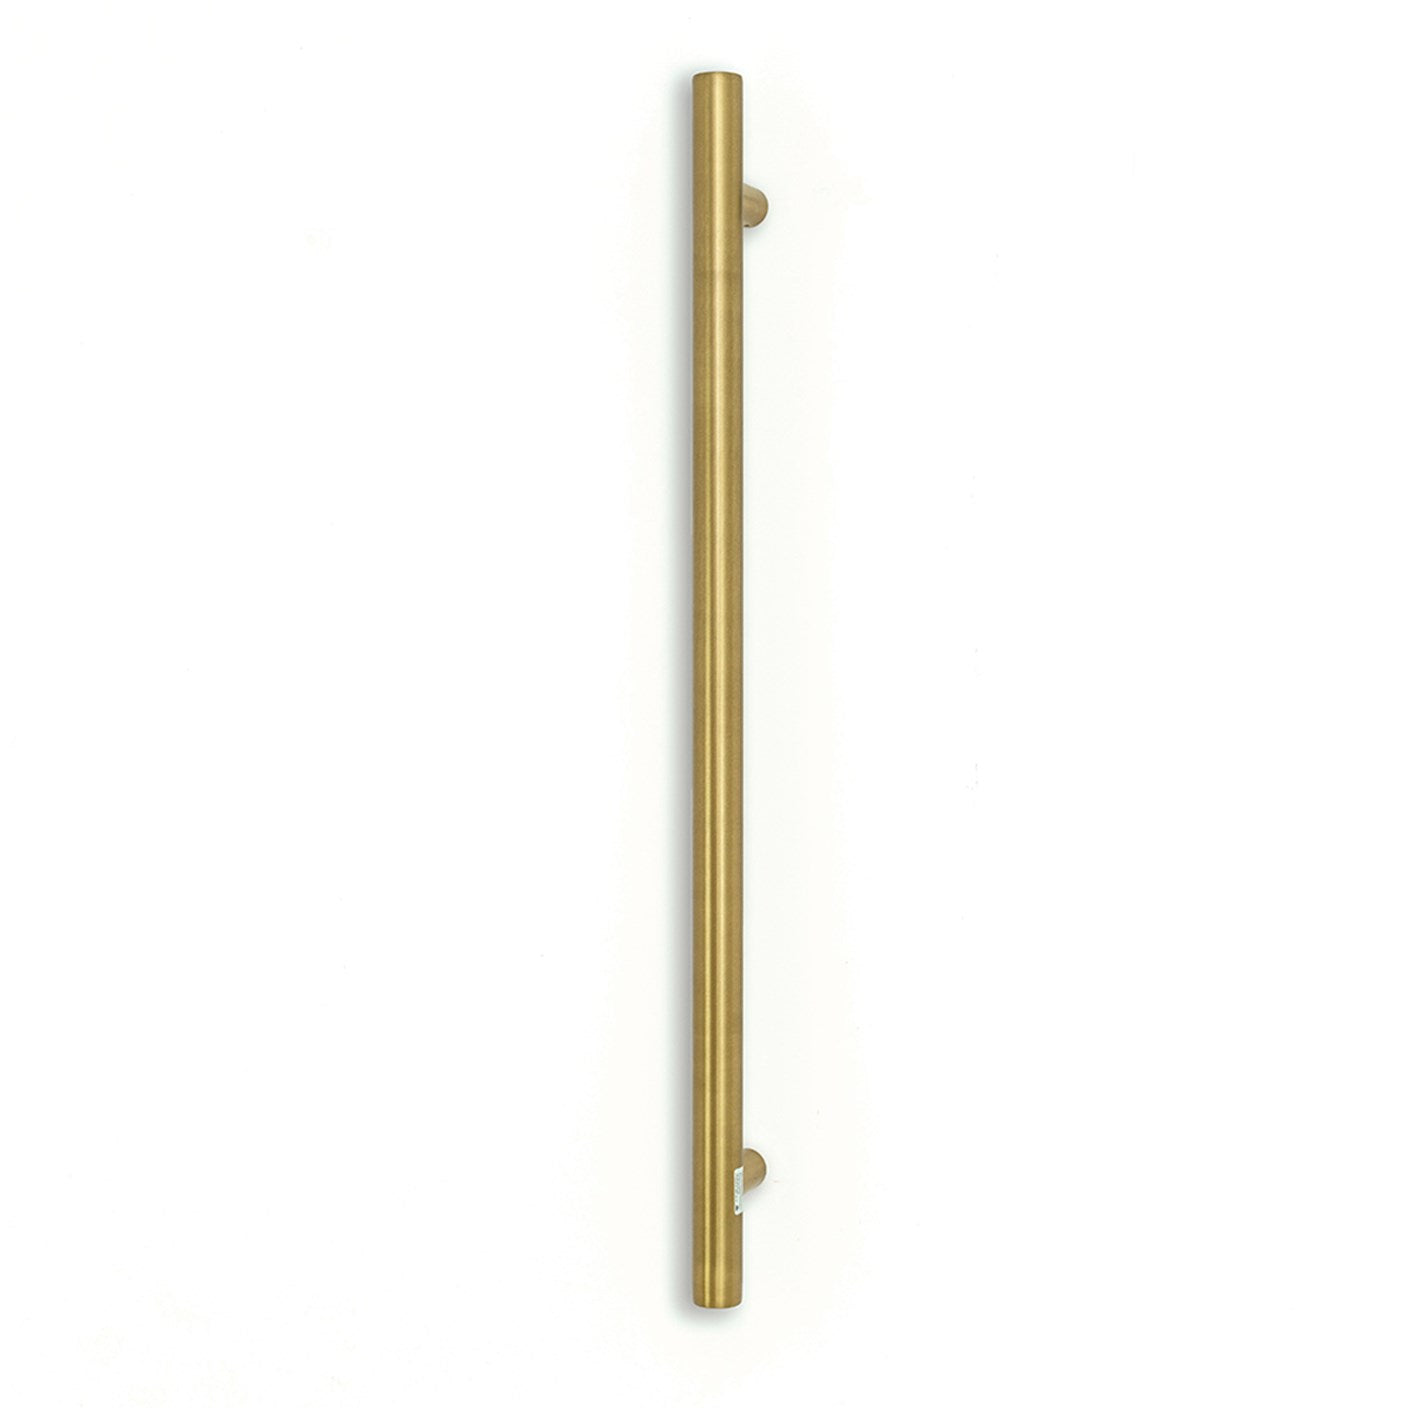 Radiant Heating Vertical Single Heated Towel Rail 40mm x 950mm, Brushed Gold